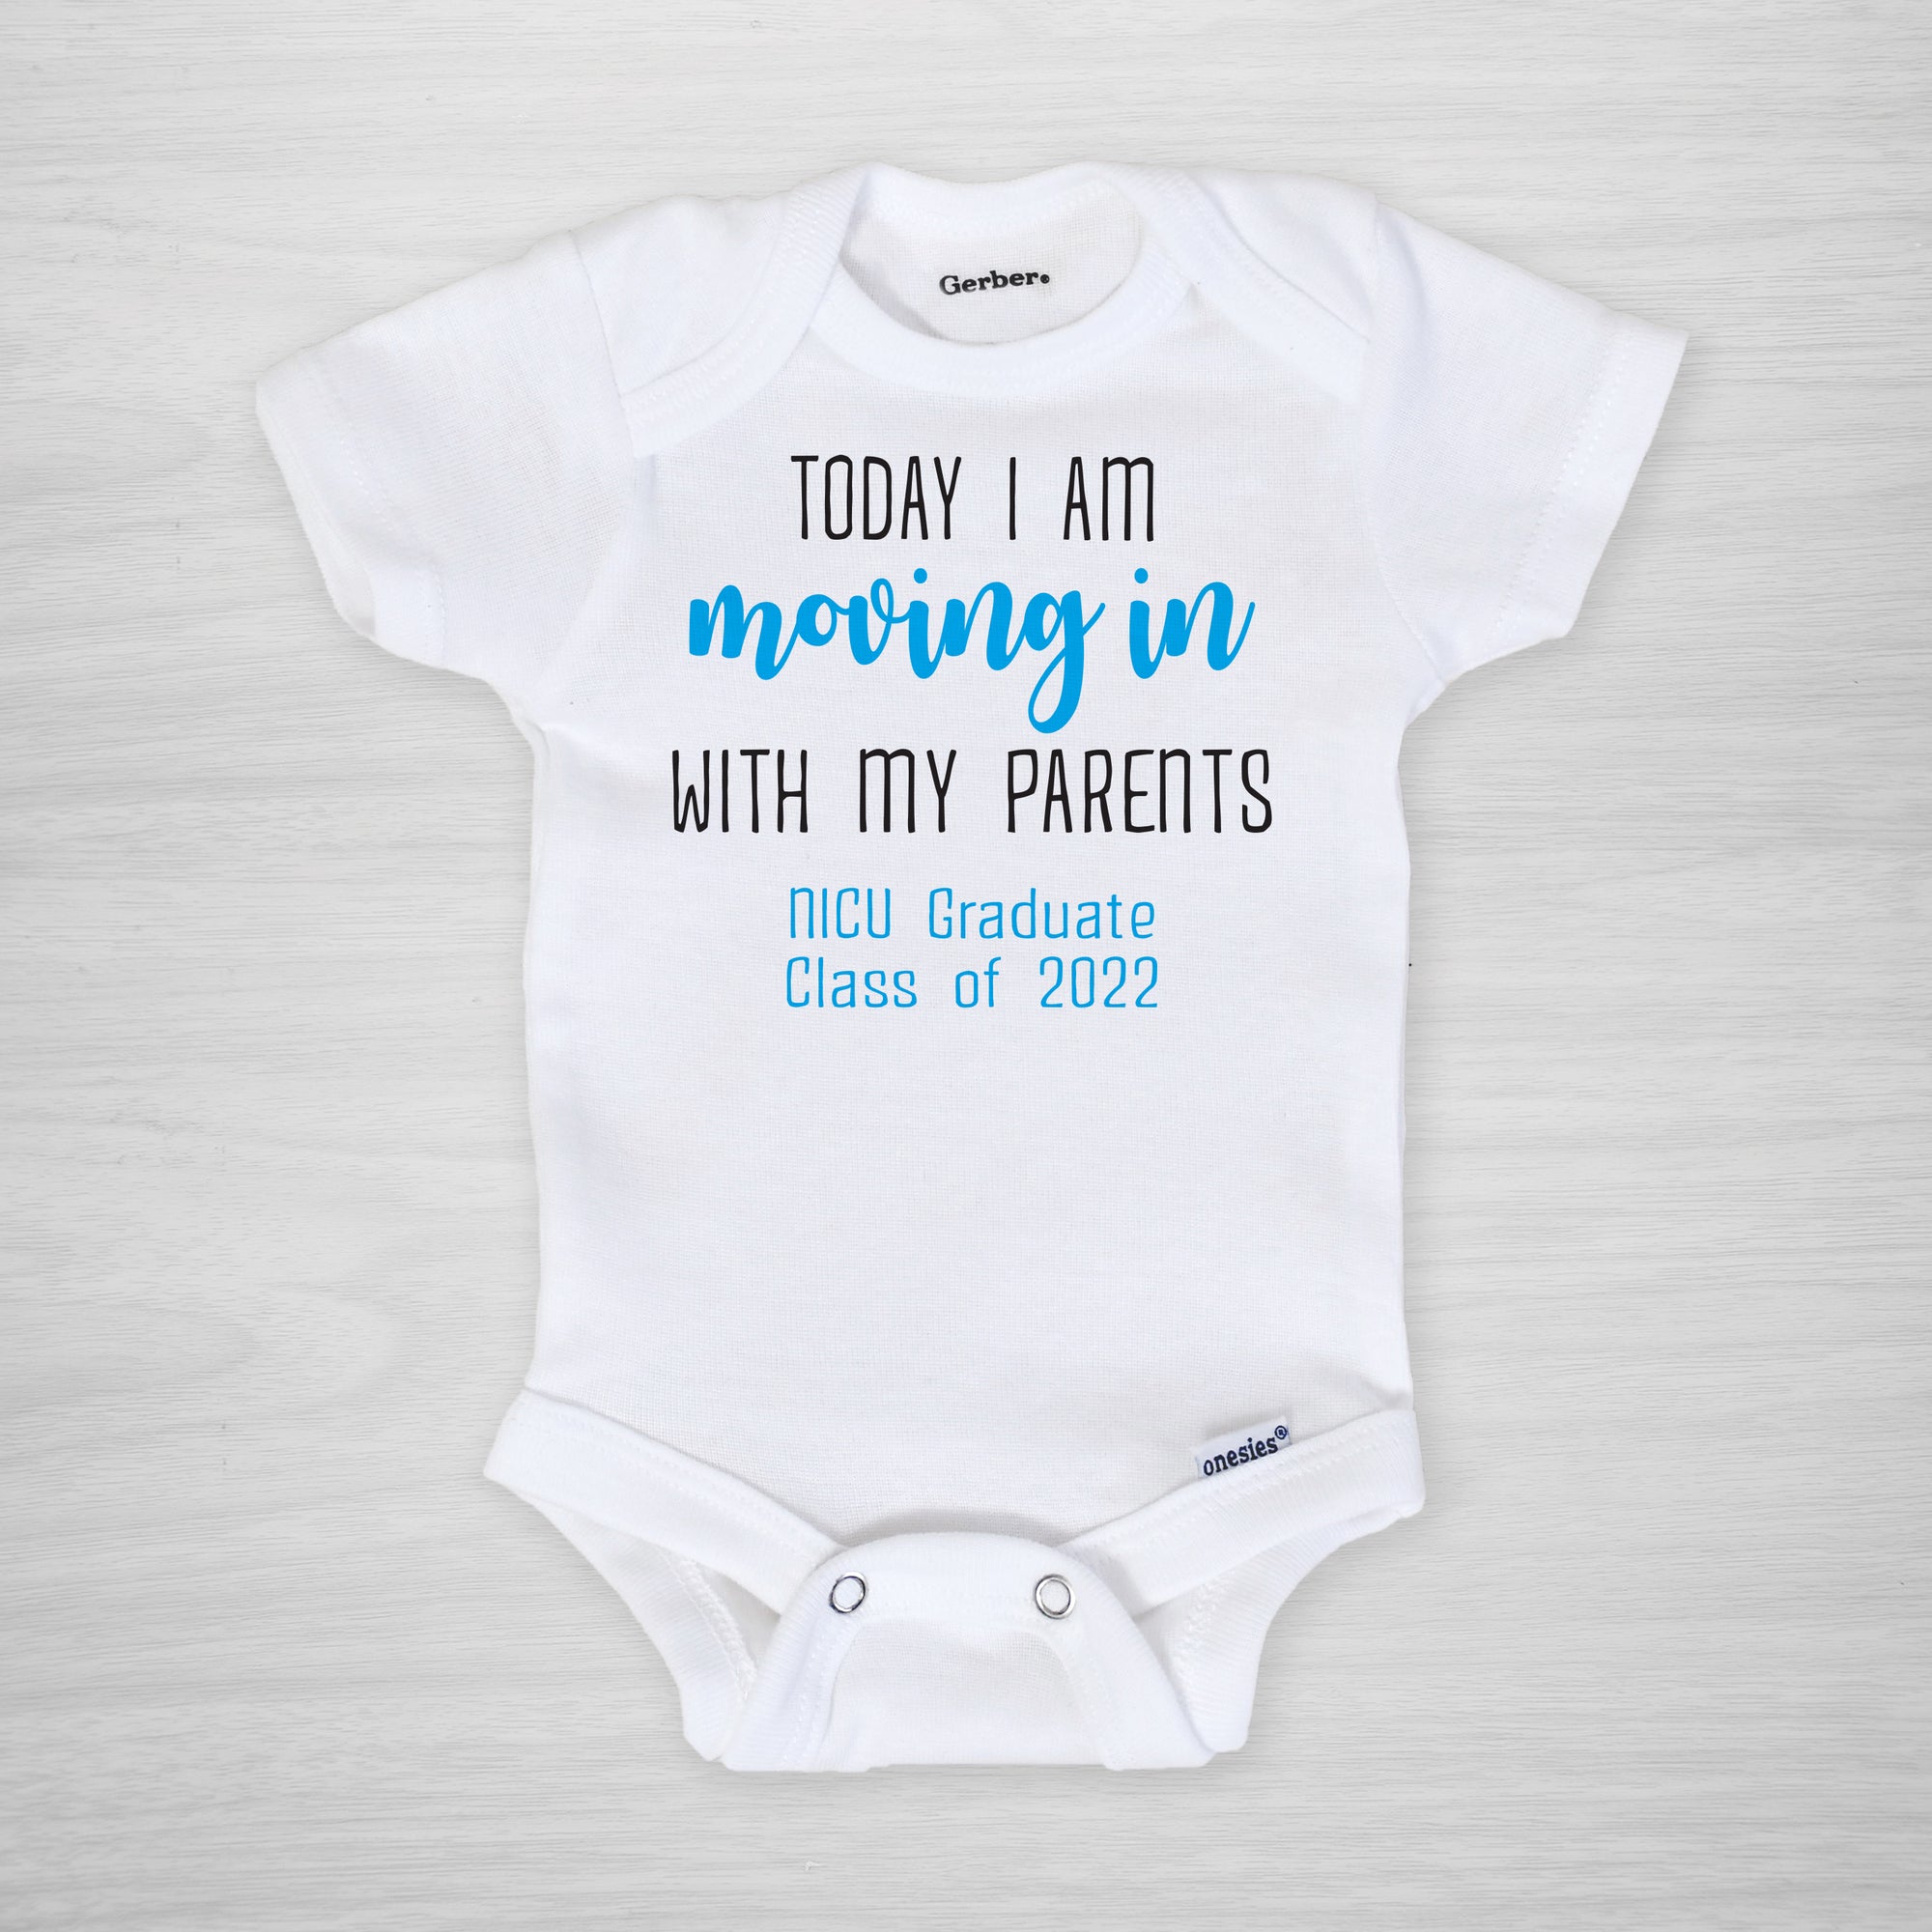 Today I am moving in with my parents, NICU Graduate Class of 2022, long sleeved blue, pipsy.com